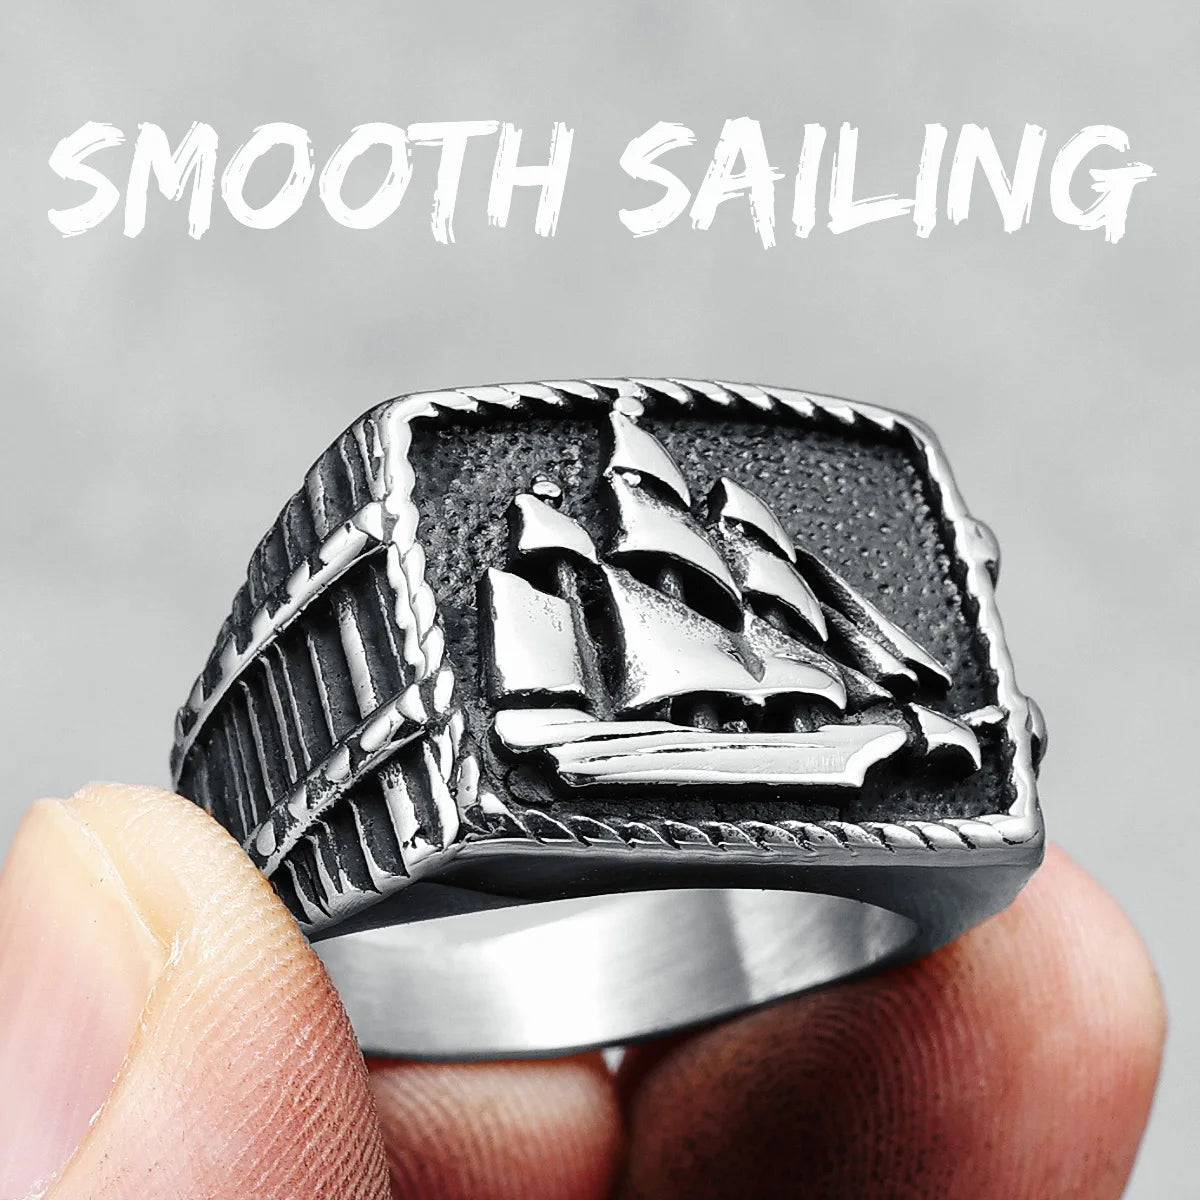 Sailboat Ring 316L Stainless Steel Men Rings Ocean Sailor Smooth Sailing Rock Rap for Biker Male Boyfriend Jewelry Best Gift R872-Sailing